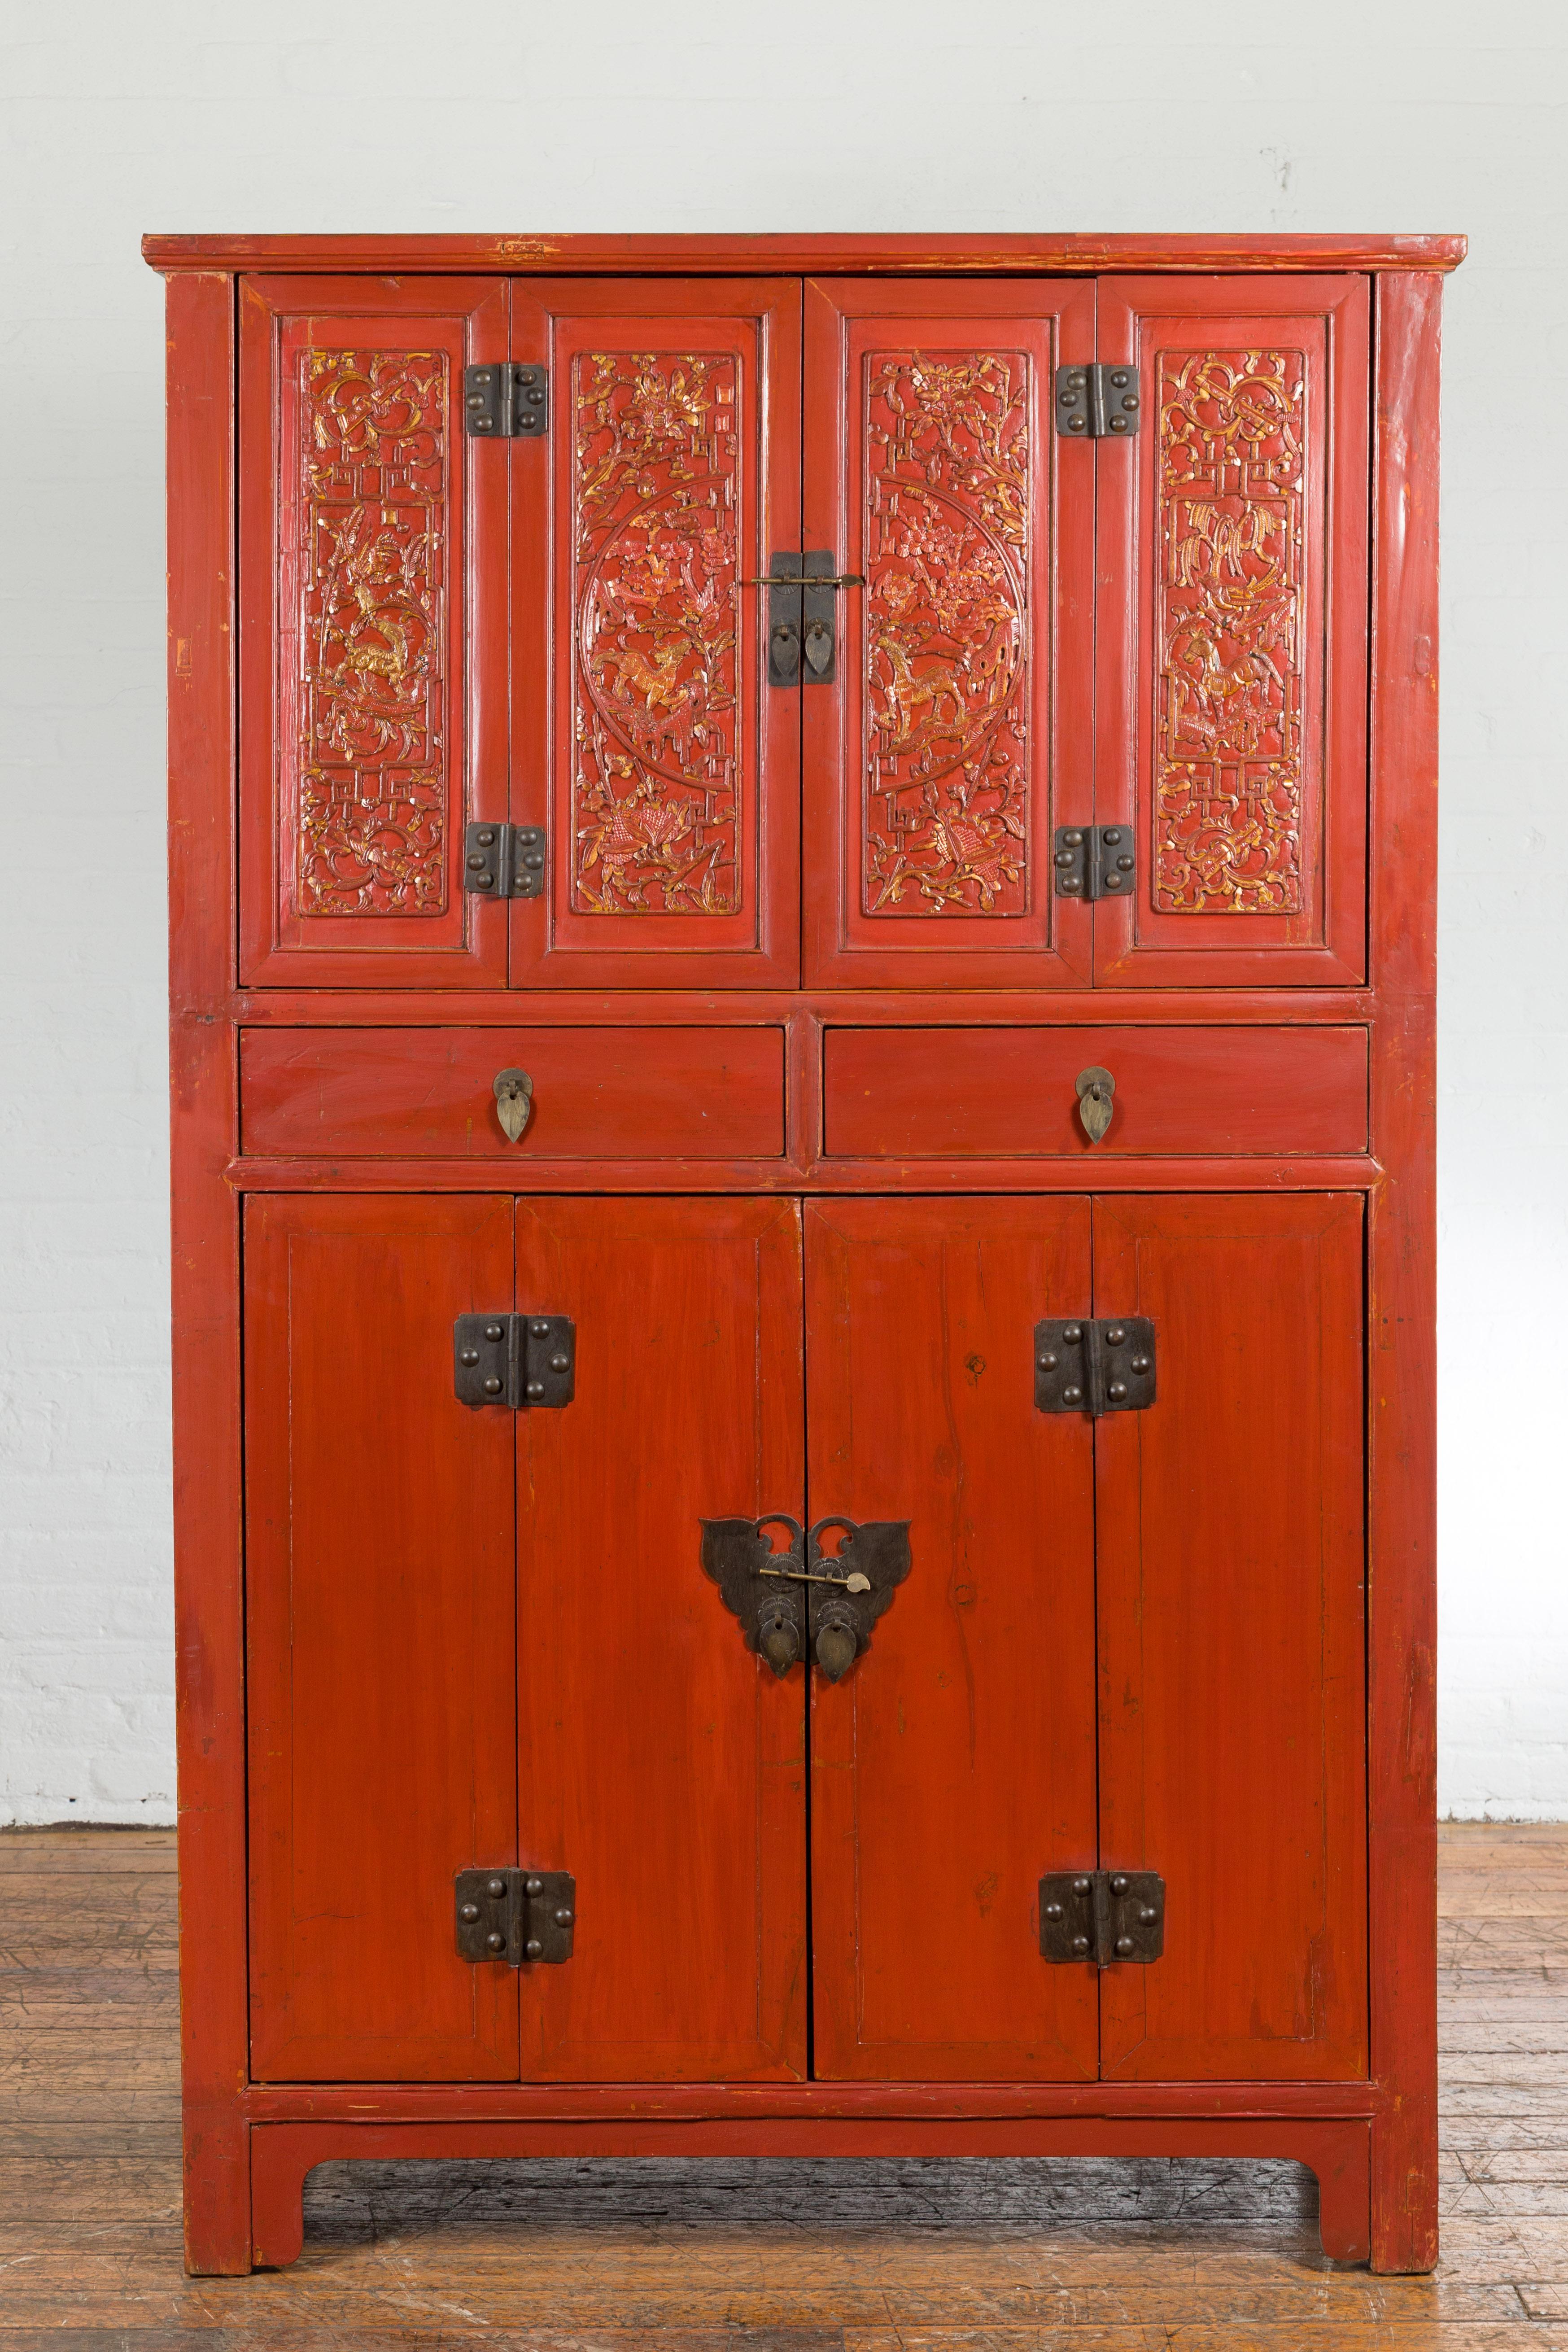 A Chinese late Qing Dynasty period red lacquered cabinet from the early 20th century, with butterfly hardware, two drawers, four doors, carved and gilt décor. Created in China during the late Qing Dynasty period in the early years of the 20th